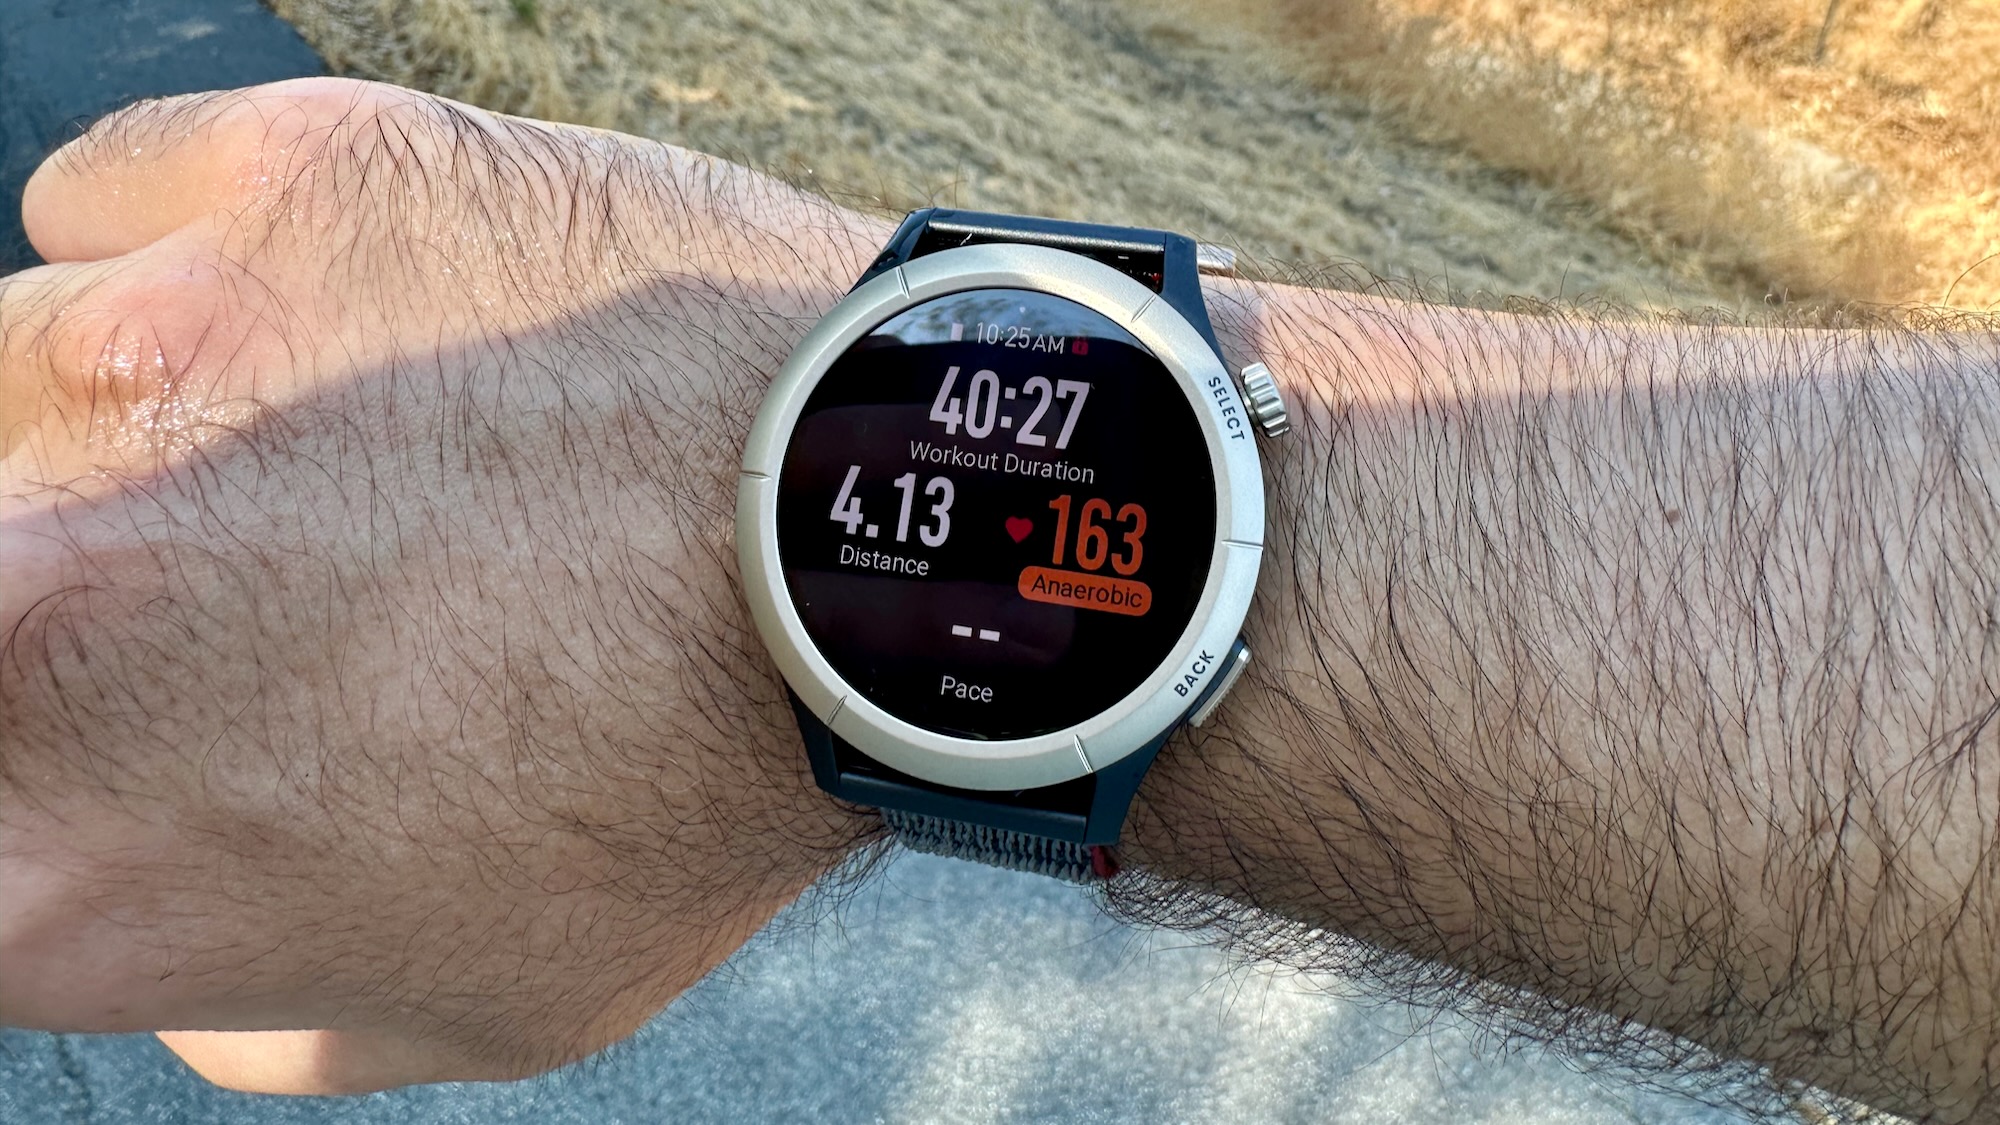 Amazfit Cheetah, Become the Runner You Aspire to be